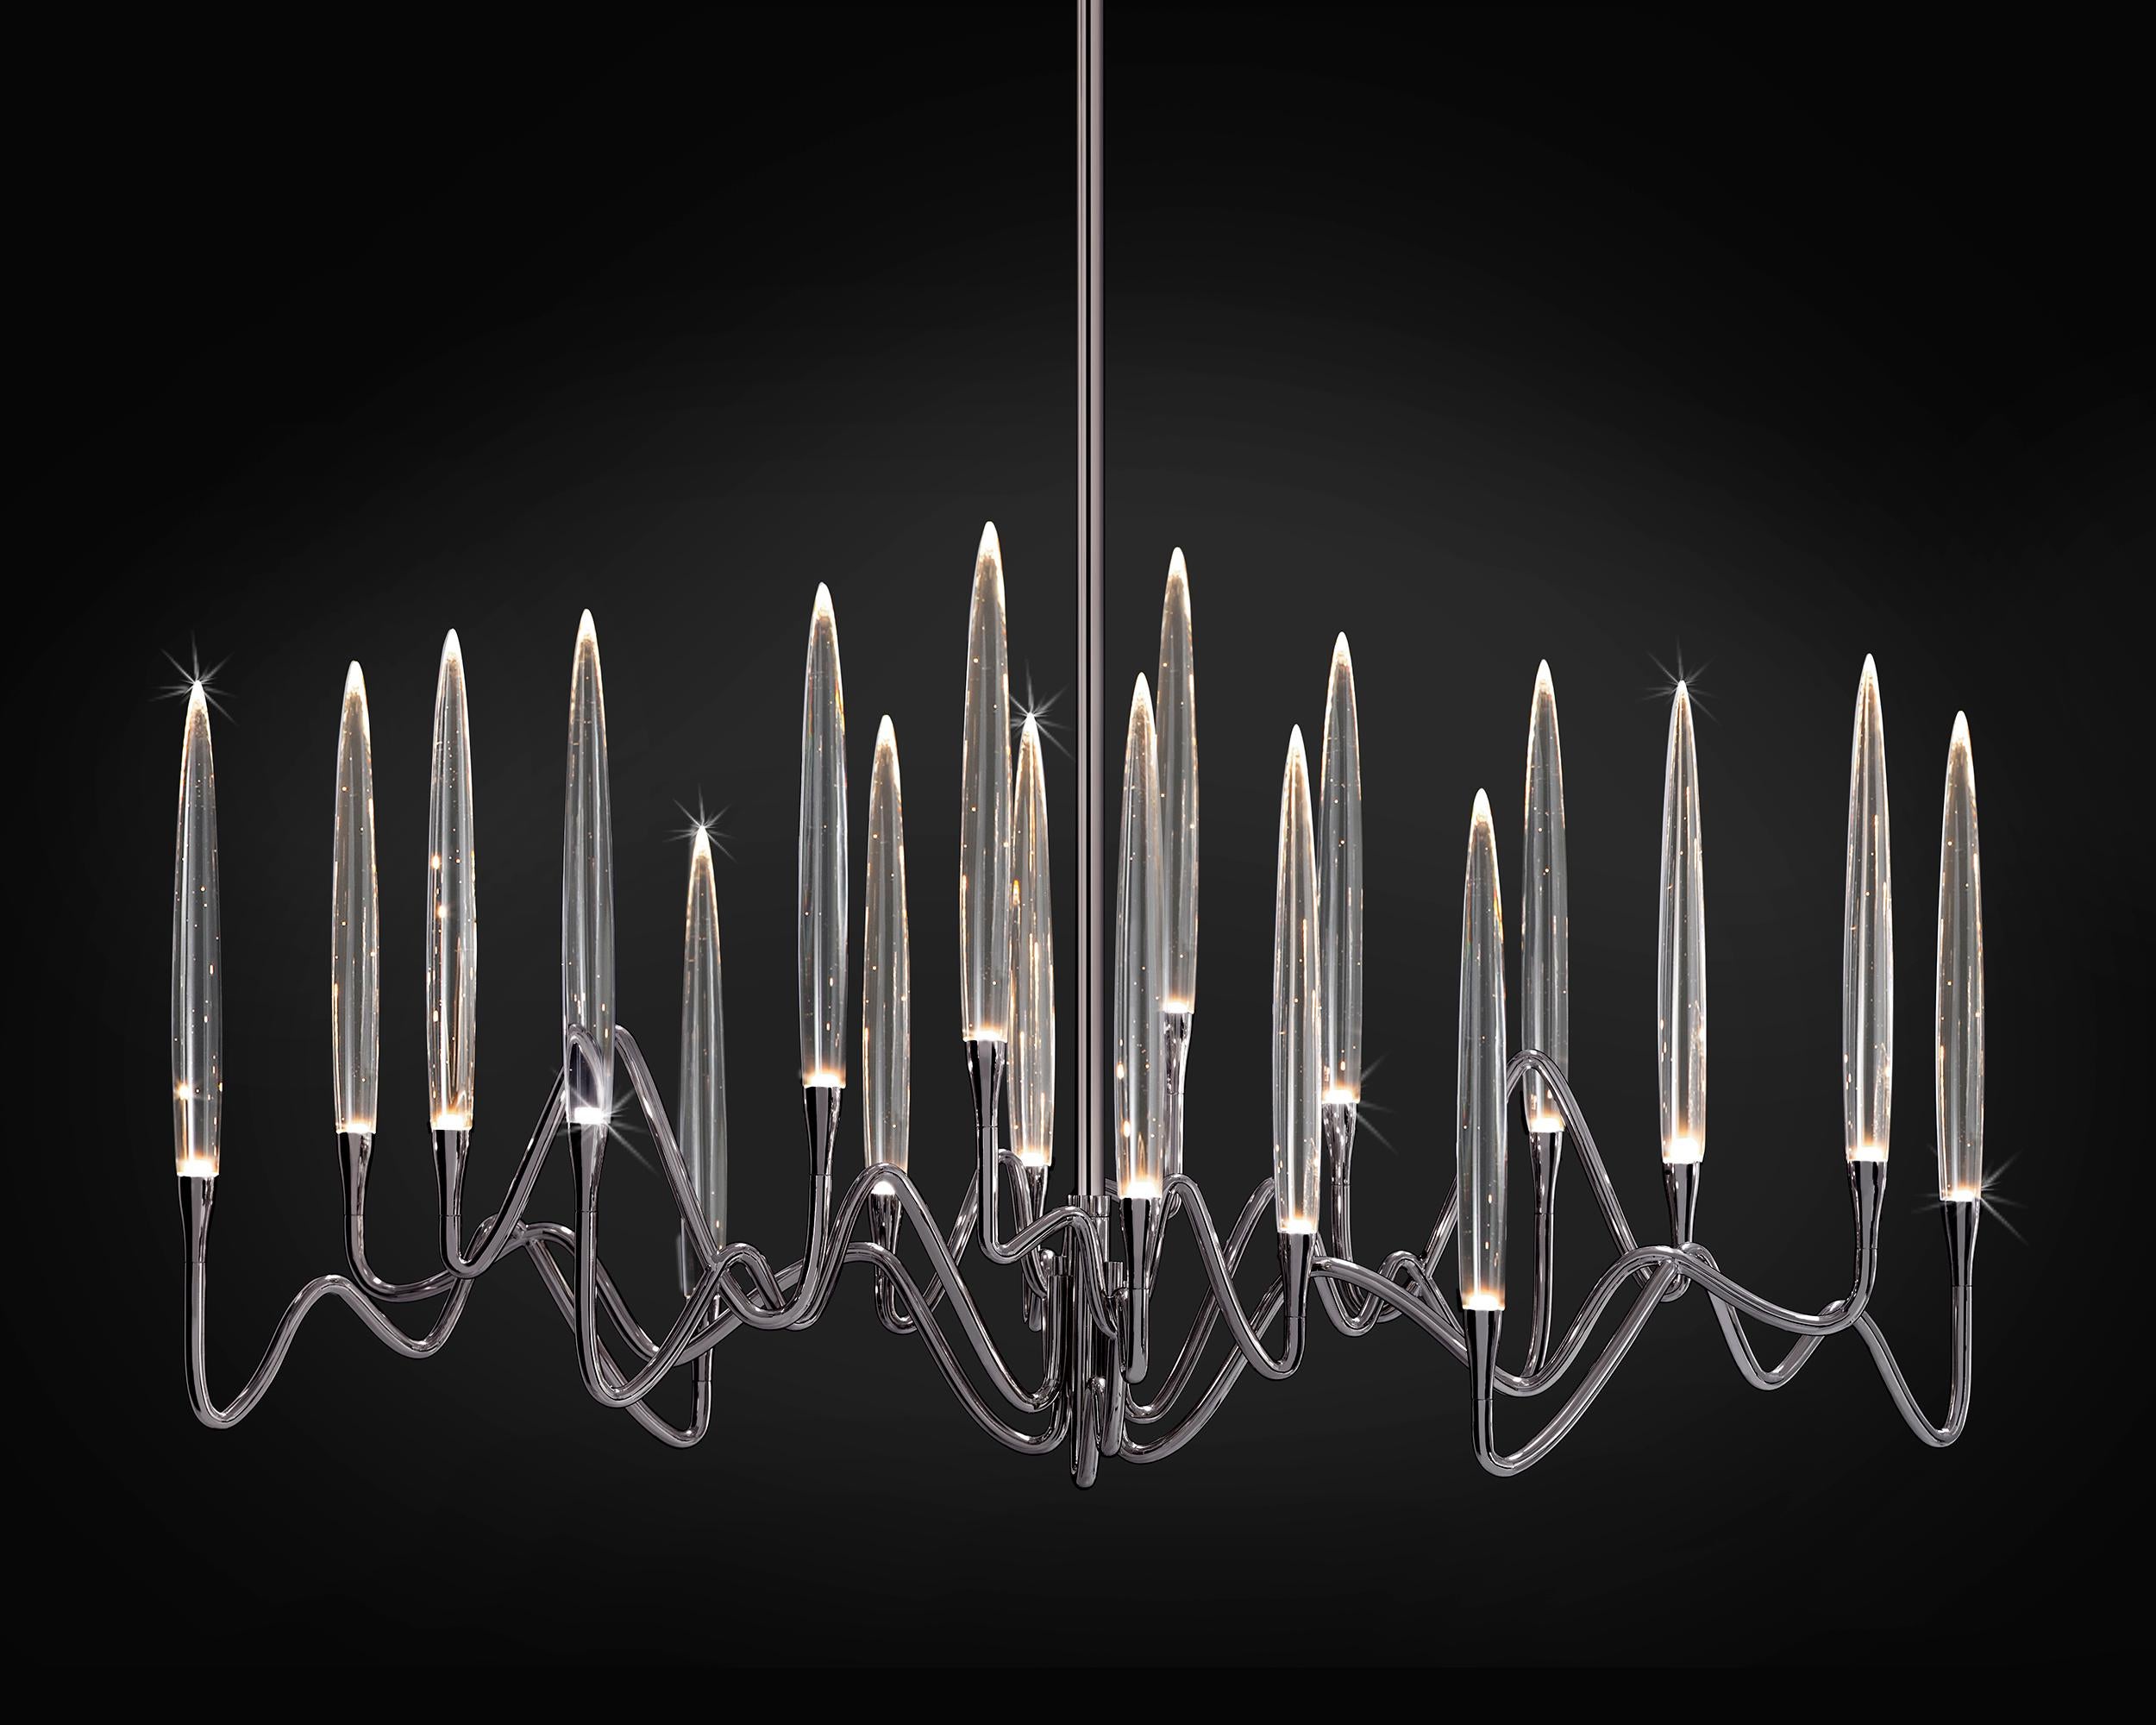 Inspired by Arabic calligraphic art and the icon of the classical candelabrum is 